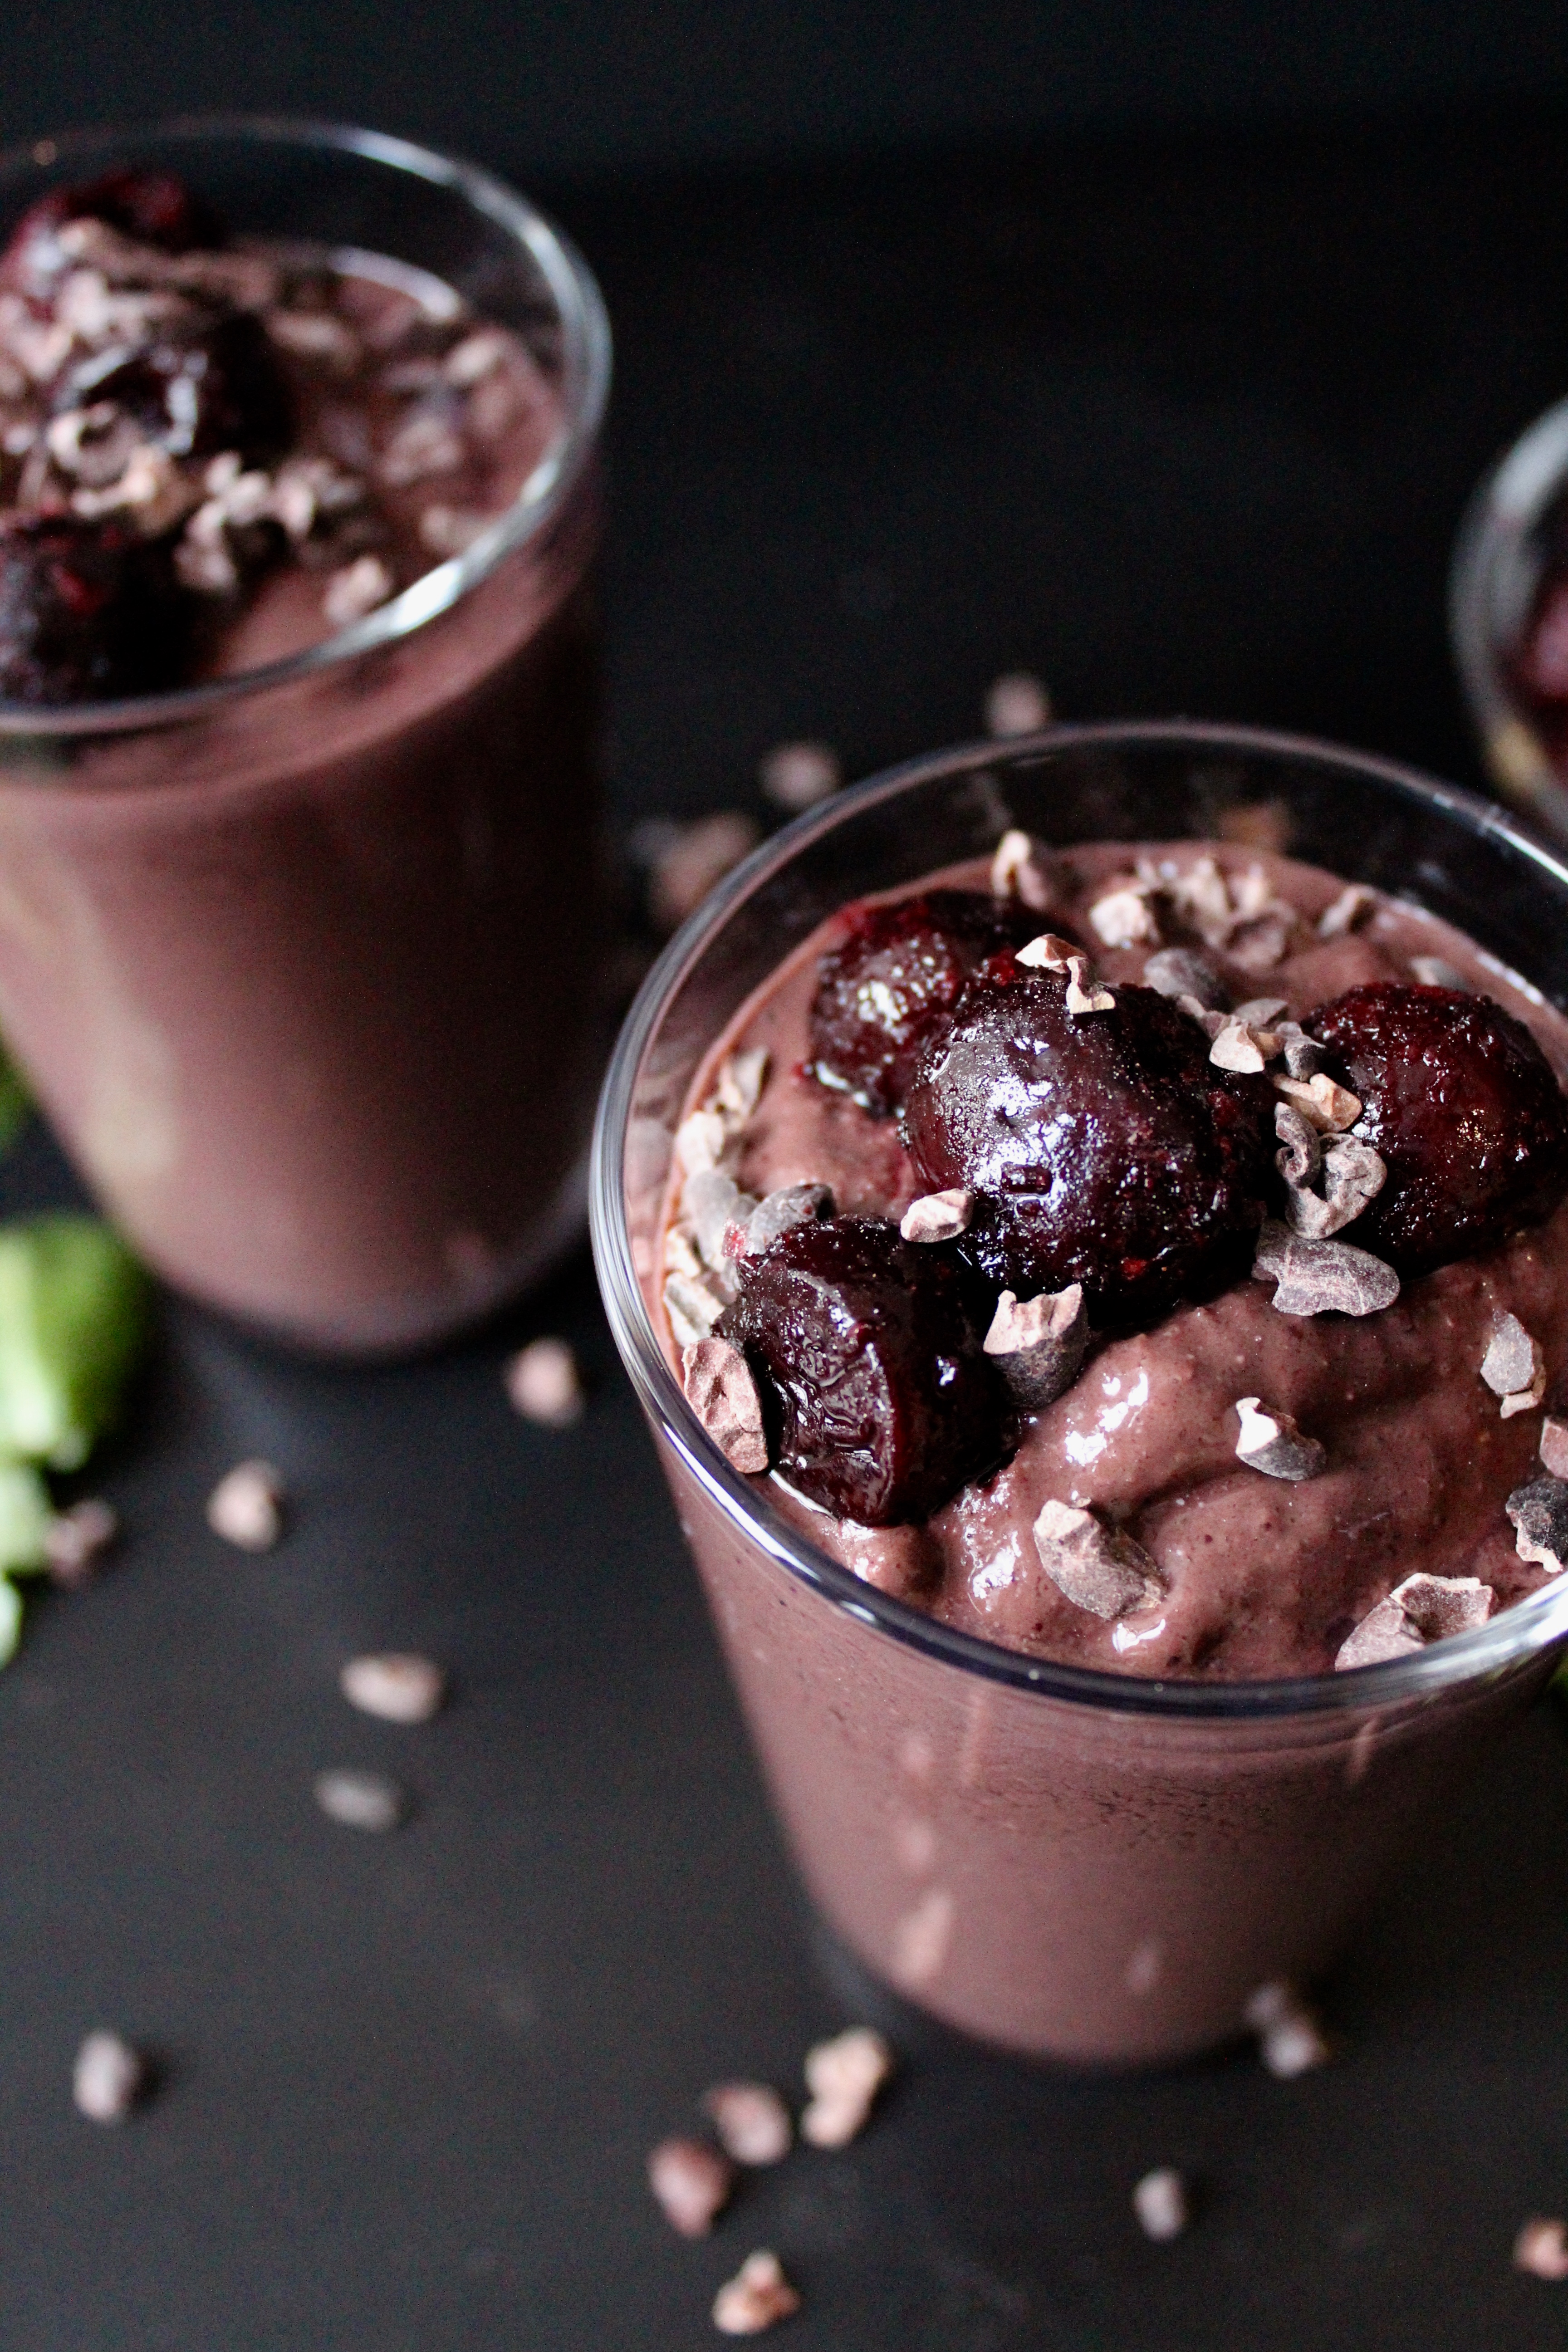 This Dark Chocolate Cherry Protein Shake has over 20 grams of protein without any protein powder!